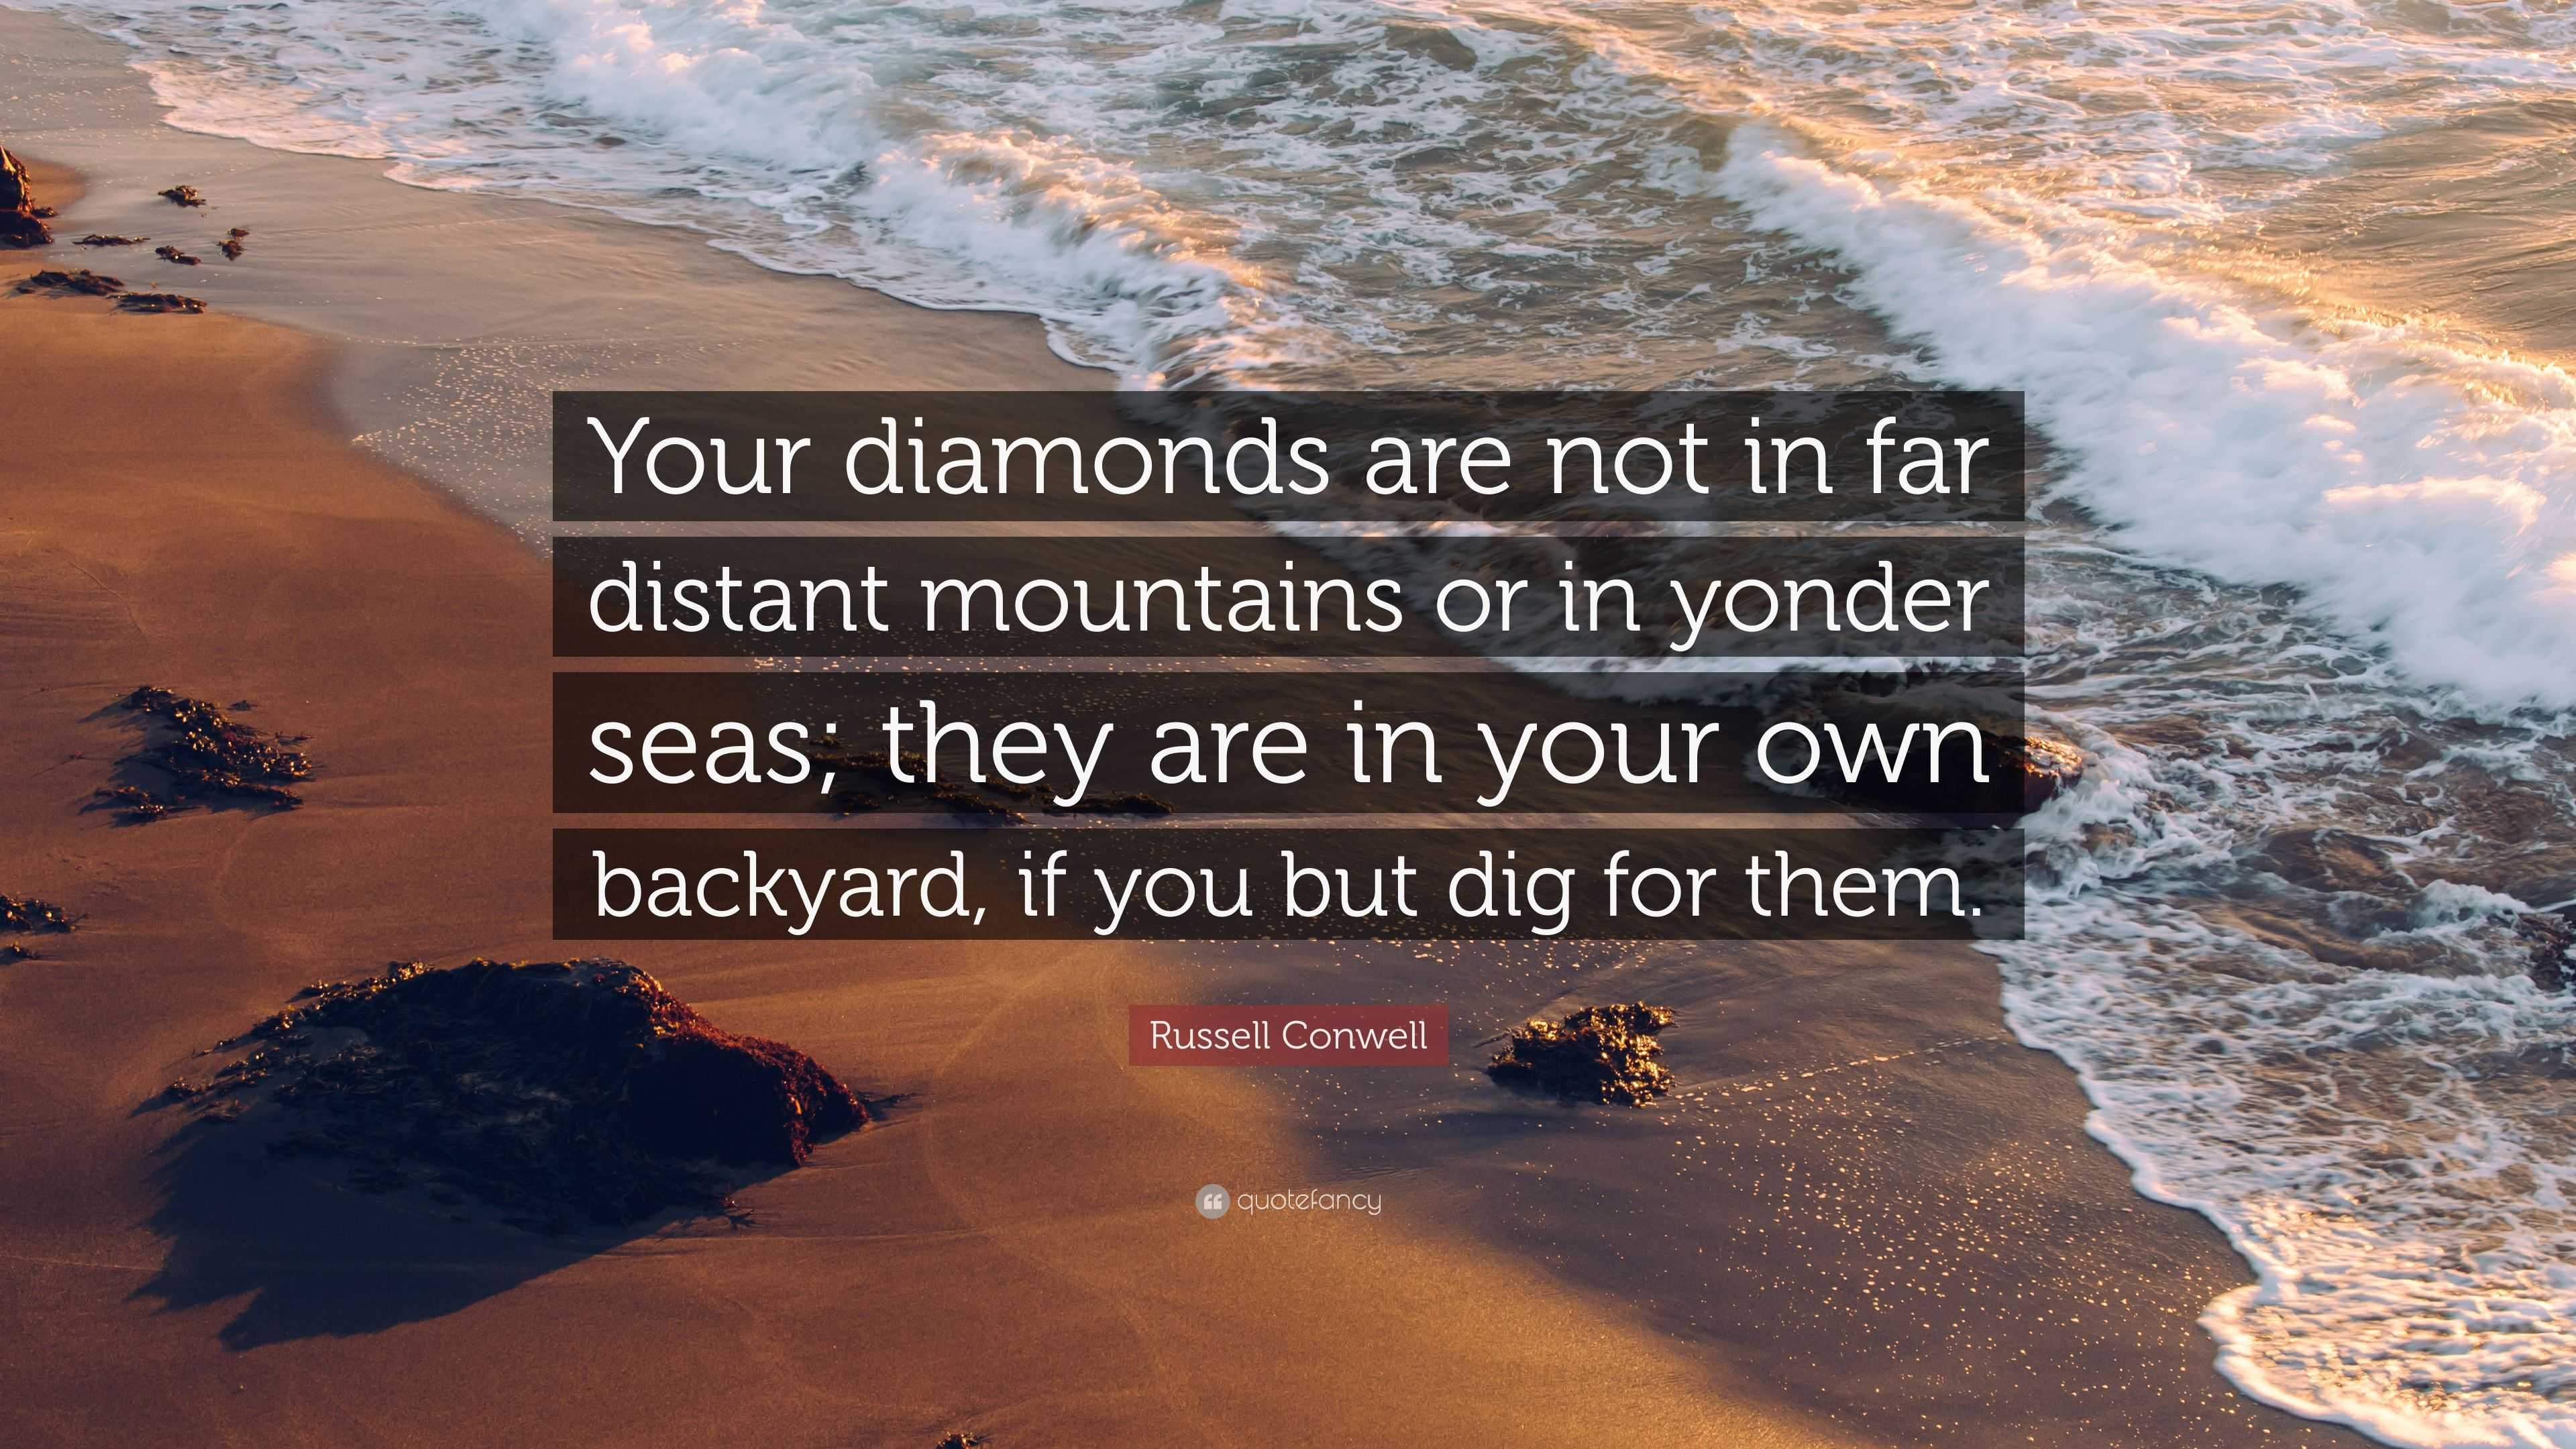 Russell Conwell Quote: “Your diamonds are not in far distant mountains or  in yonder seas; they are in your own backyard, if you but dig for them”